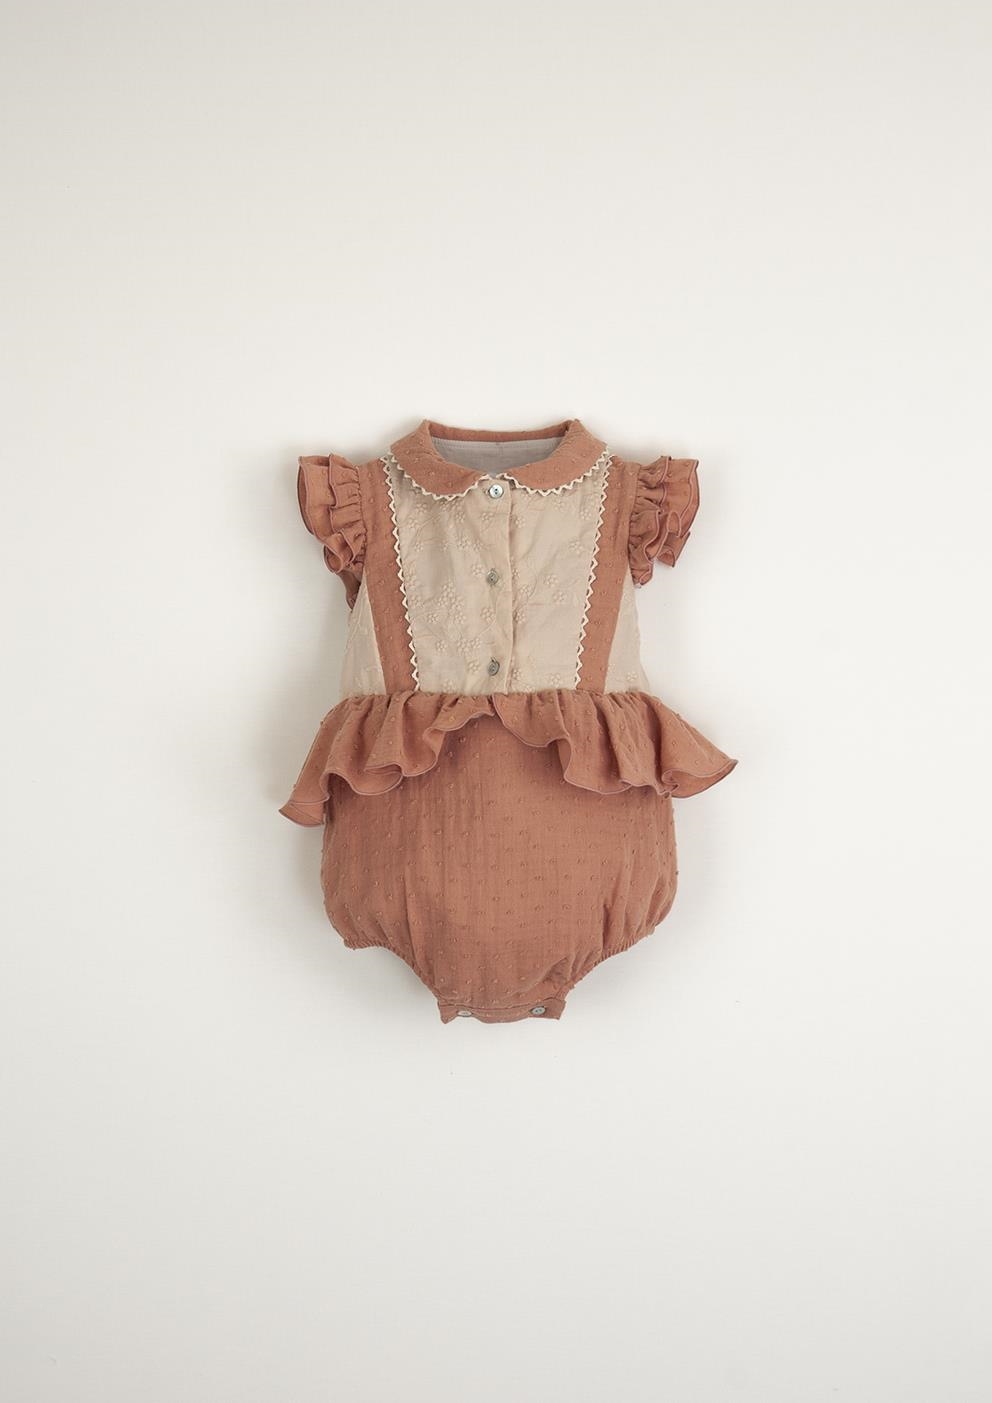 Mod.8.2 Organic coral romper suit with collar | SS23 Mod.8.2 Organic coral romper suit with collar